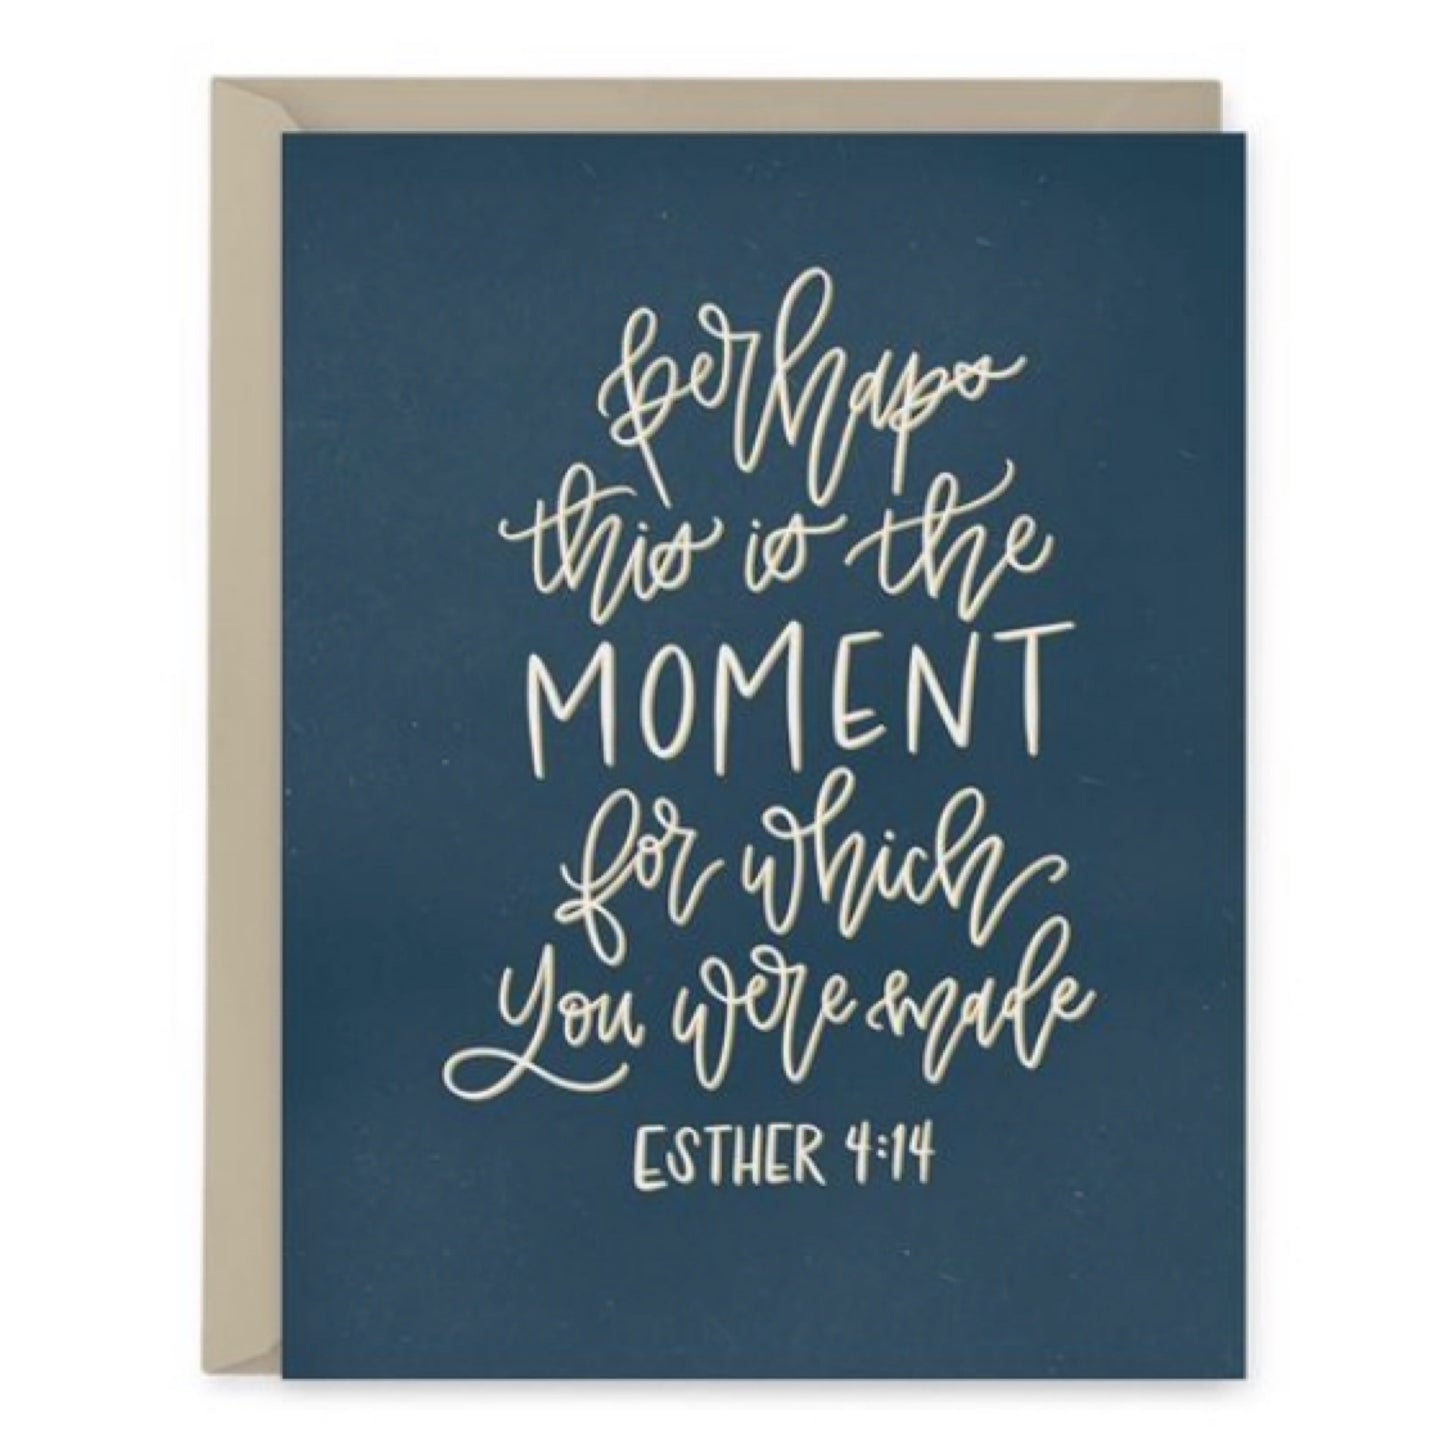 Esther 4:14 Greeting Card